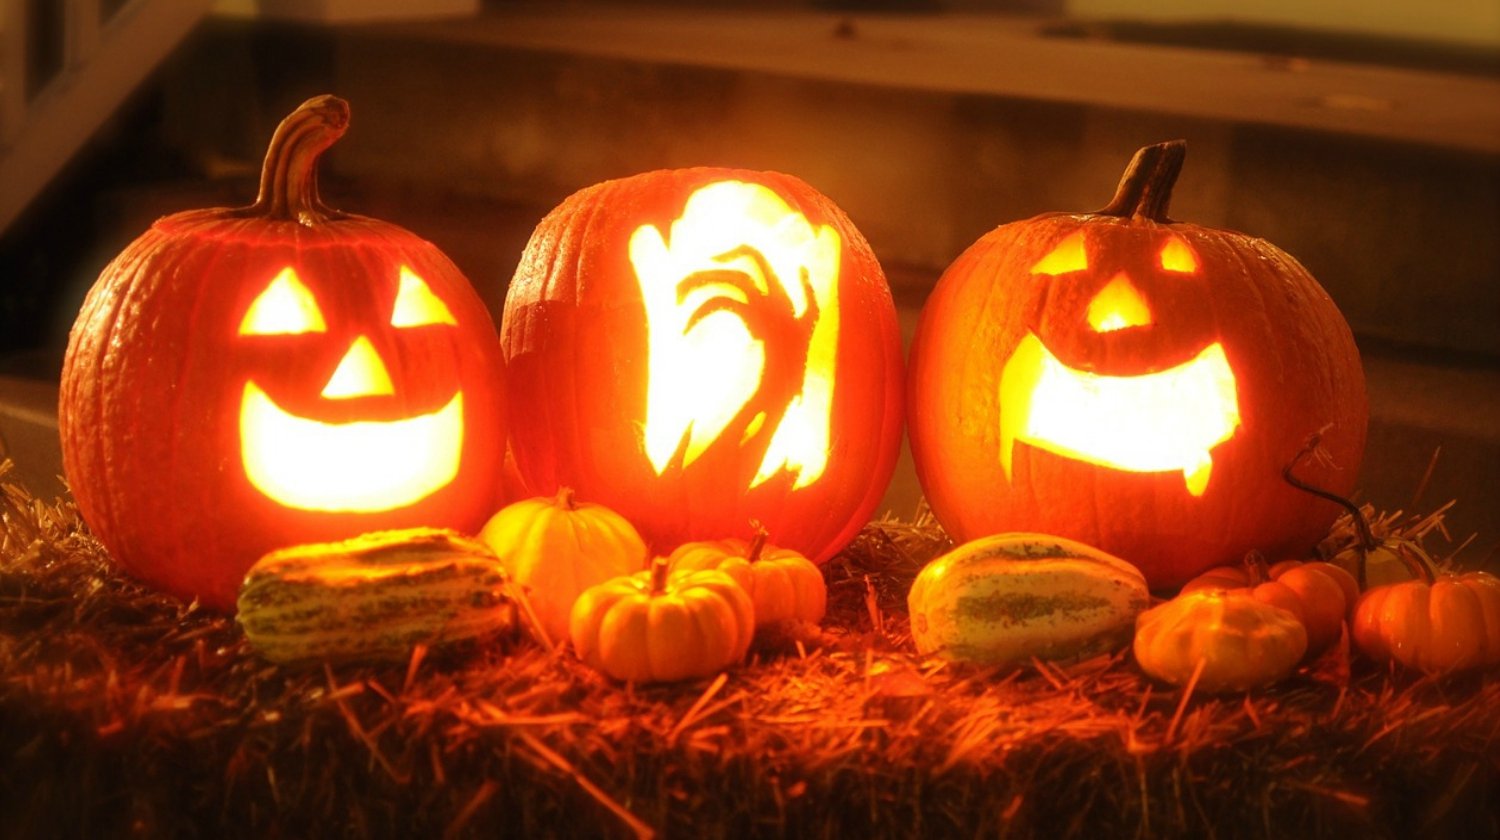 Amazing Jack O Lantern Carving Ideas For You And The Kids,Tuxedo Cats Wallpaper